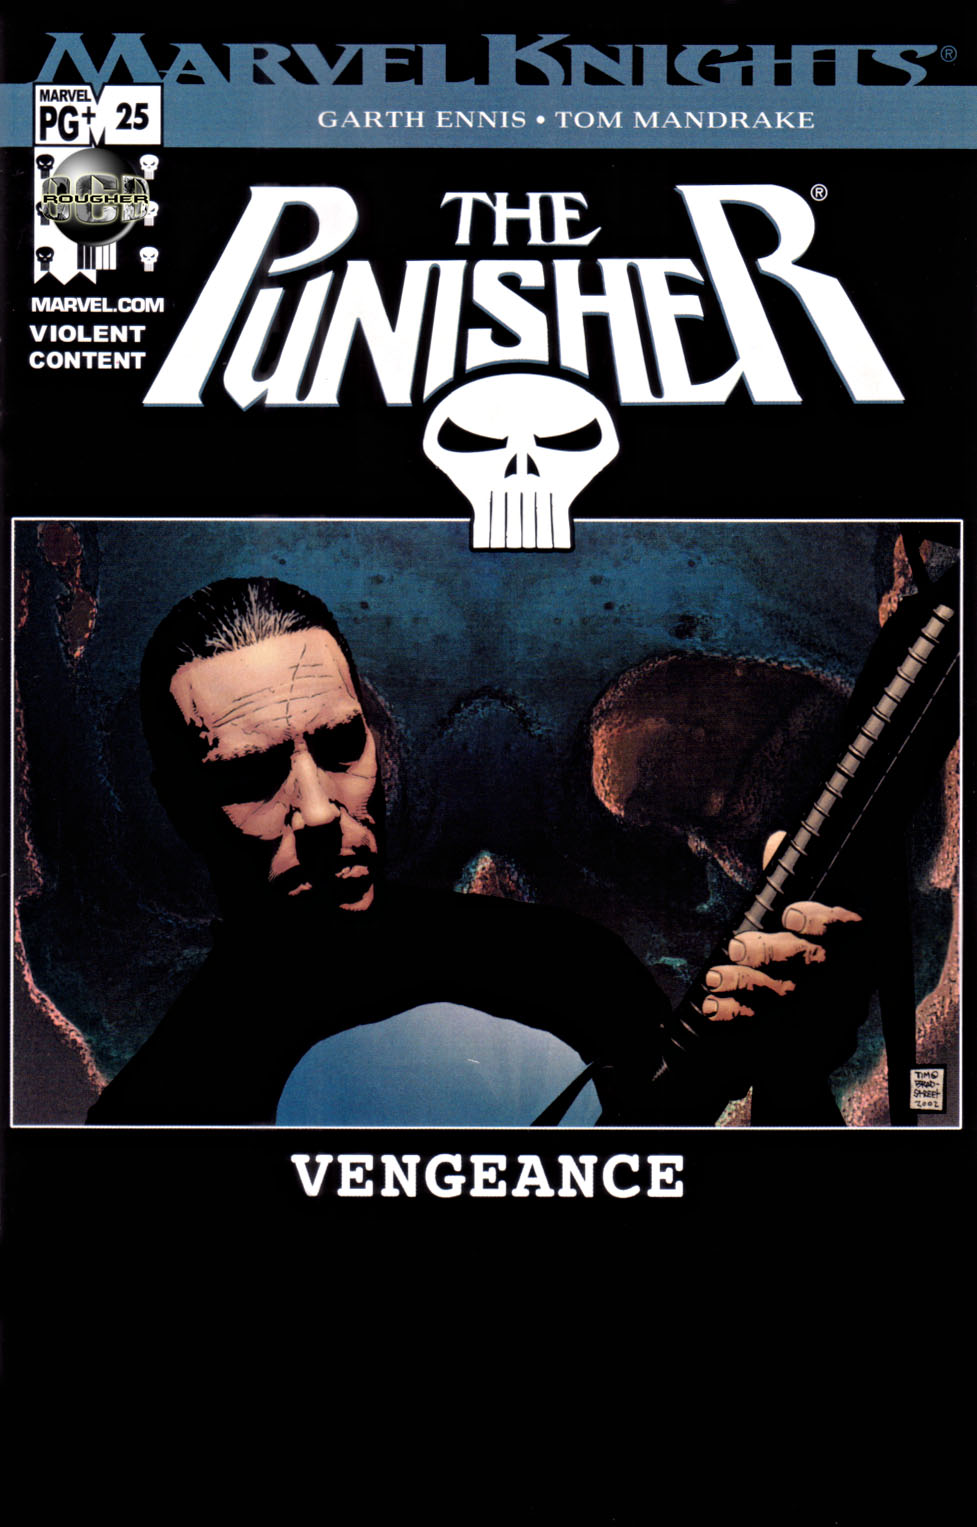 The Punisher (2001) issue 25 - Hidden #02 - Page 1